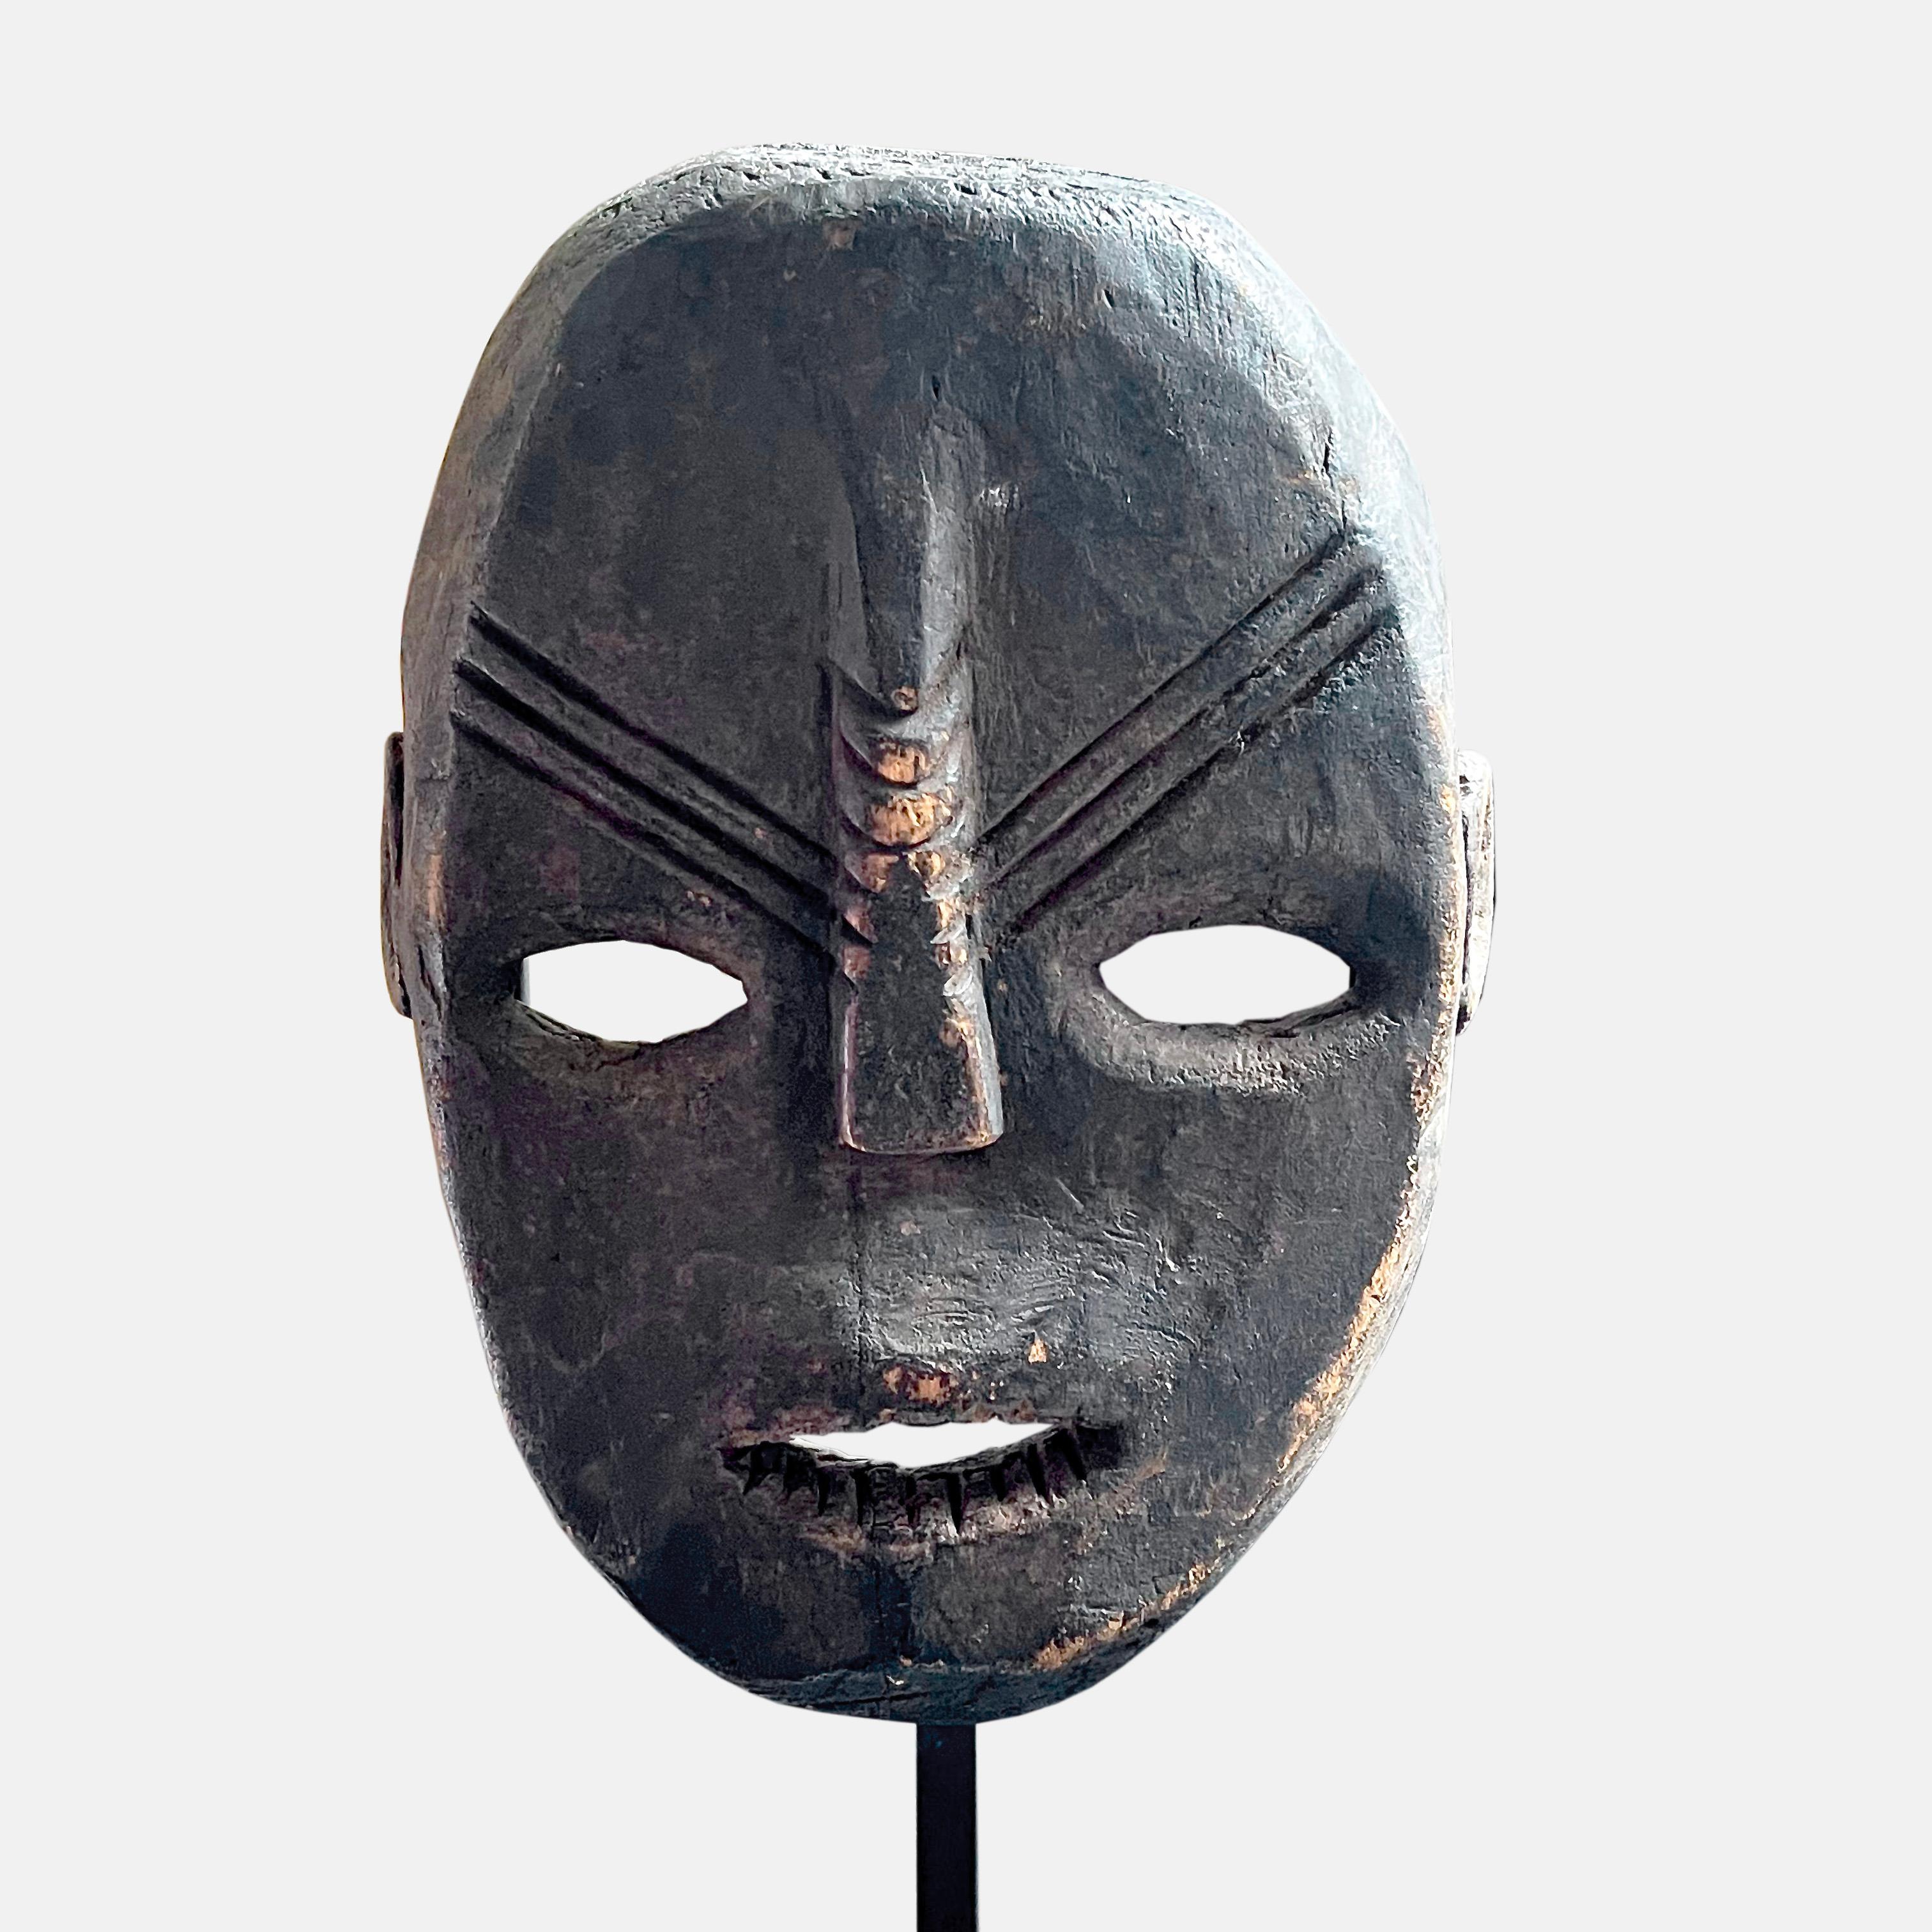 Ngbaka Congolese Tribal Mask for Initiation Rituals, Early 20th Century For Sale 2